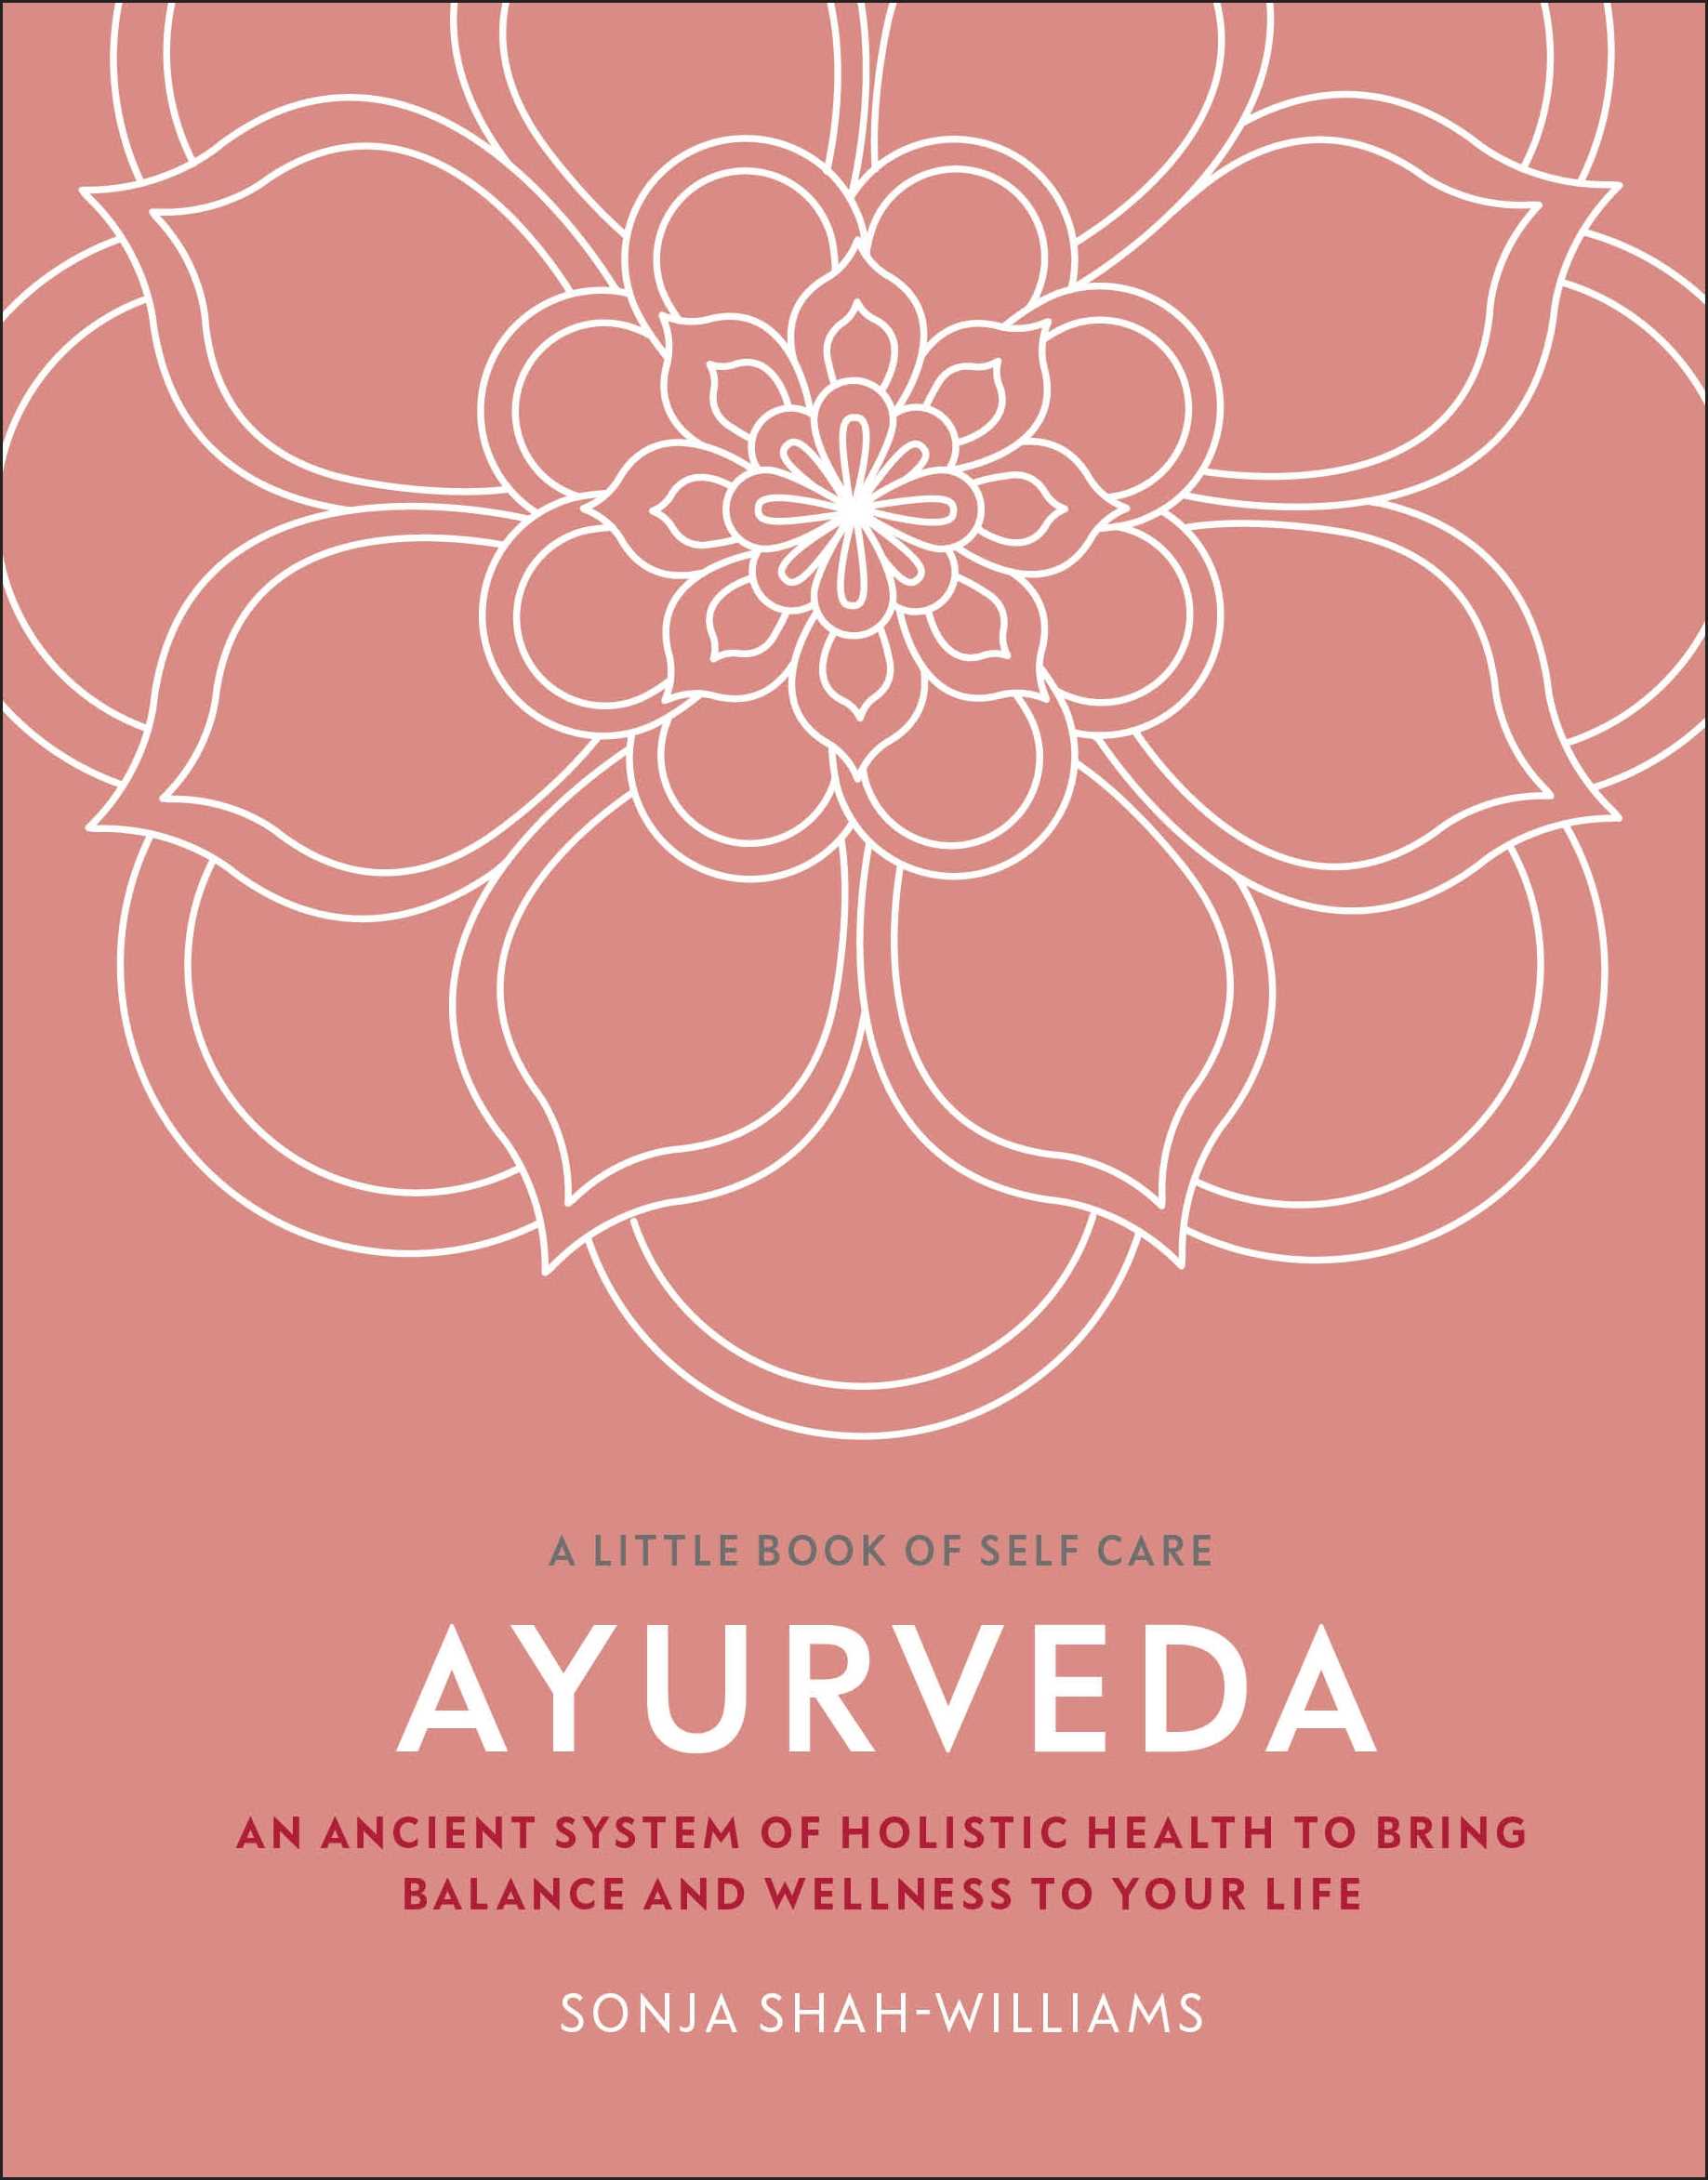 A Little Book of Self Care: Ayurveda